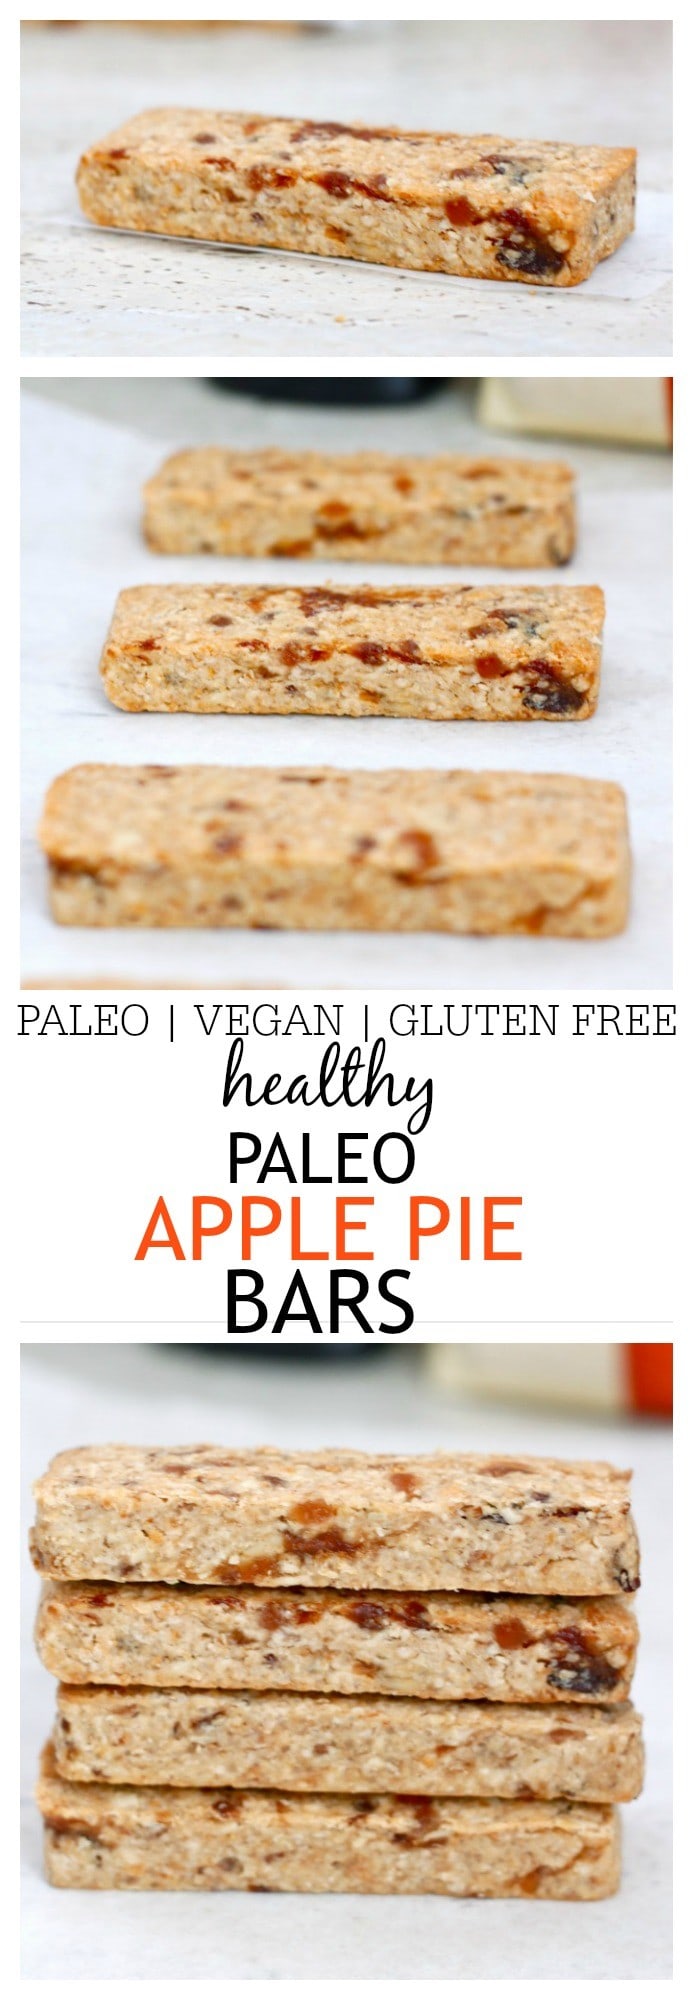 Healthy Paleo Apple Pie Bars- These easy, baked Apple Pie bars taste exactly like the comforting dessert minus all the guilt! Paleo, Gluten Free, Vegan and refined sugar free- These bars are the perfect snack between meals! @thebigmansworld -thebigmansworld.com